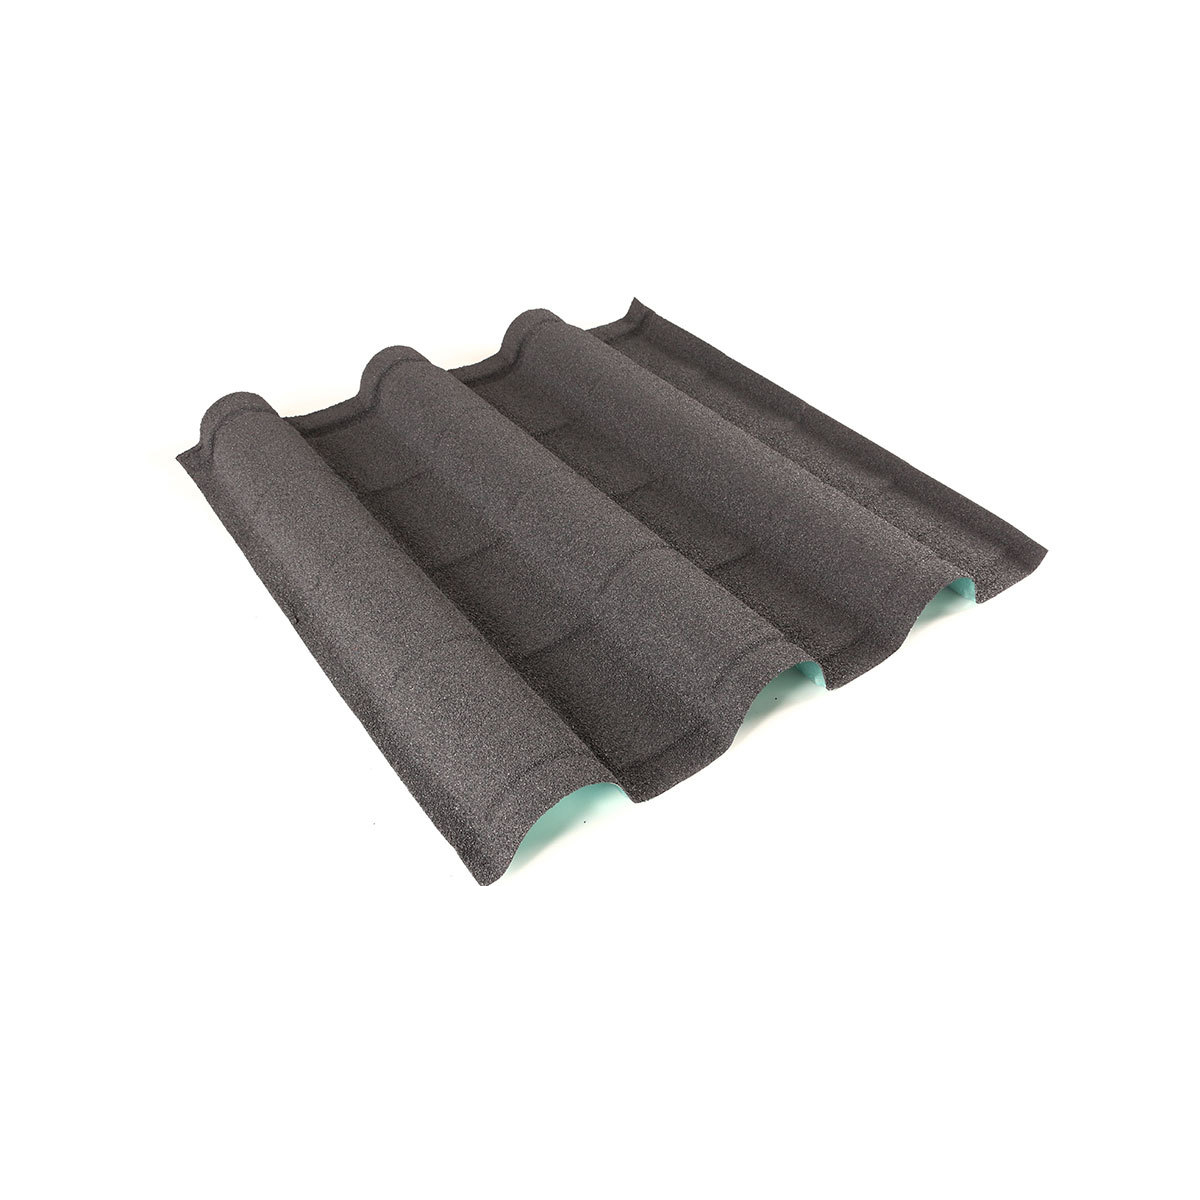 Corrugated Roofing Sheets